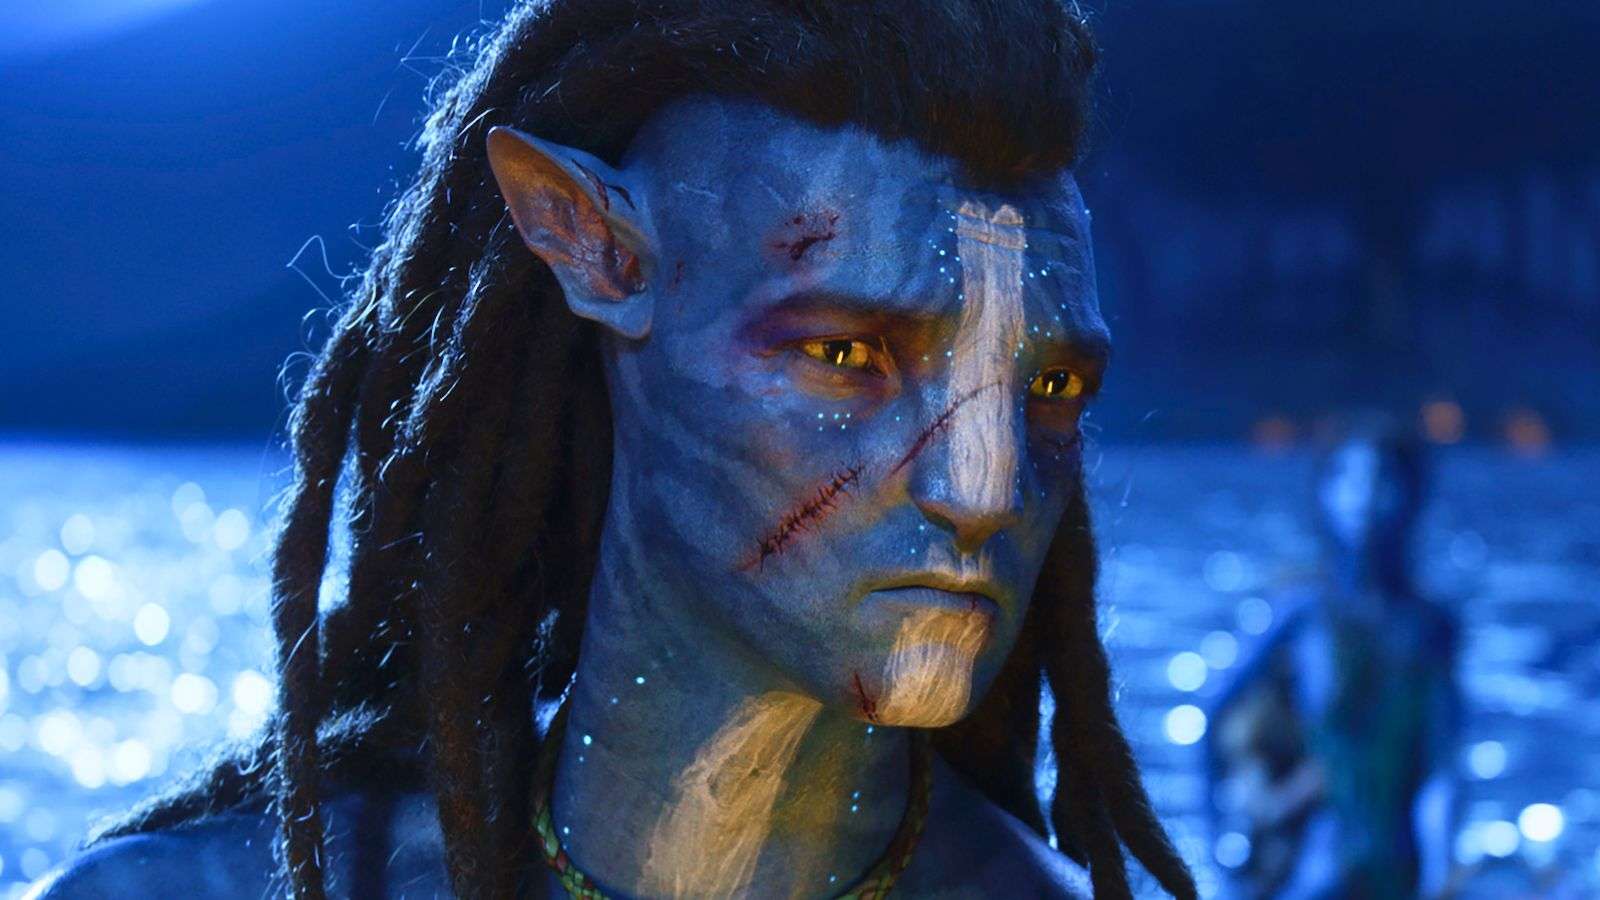 Sam Worthington as Jake Sully in Avatar 2. He stands with water behind him at night.